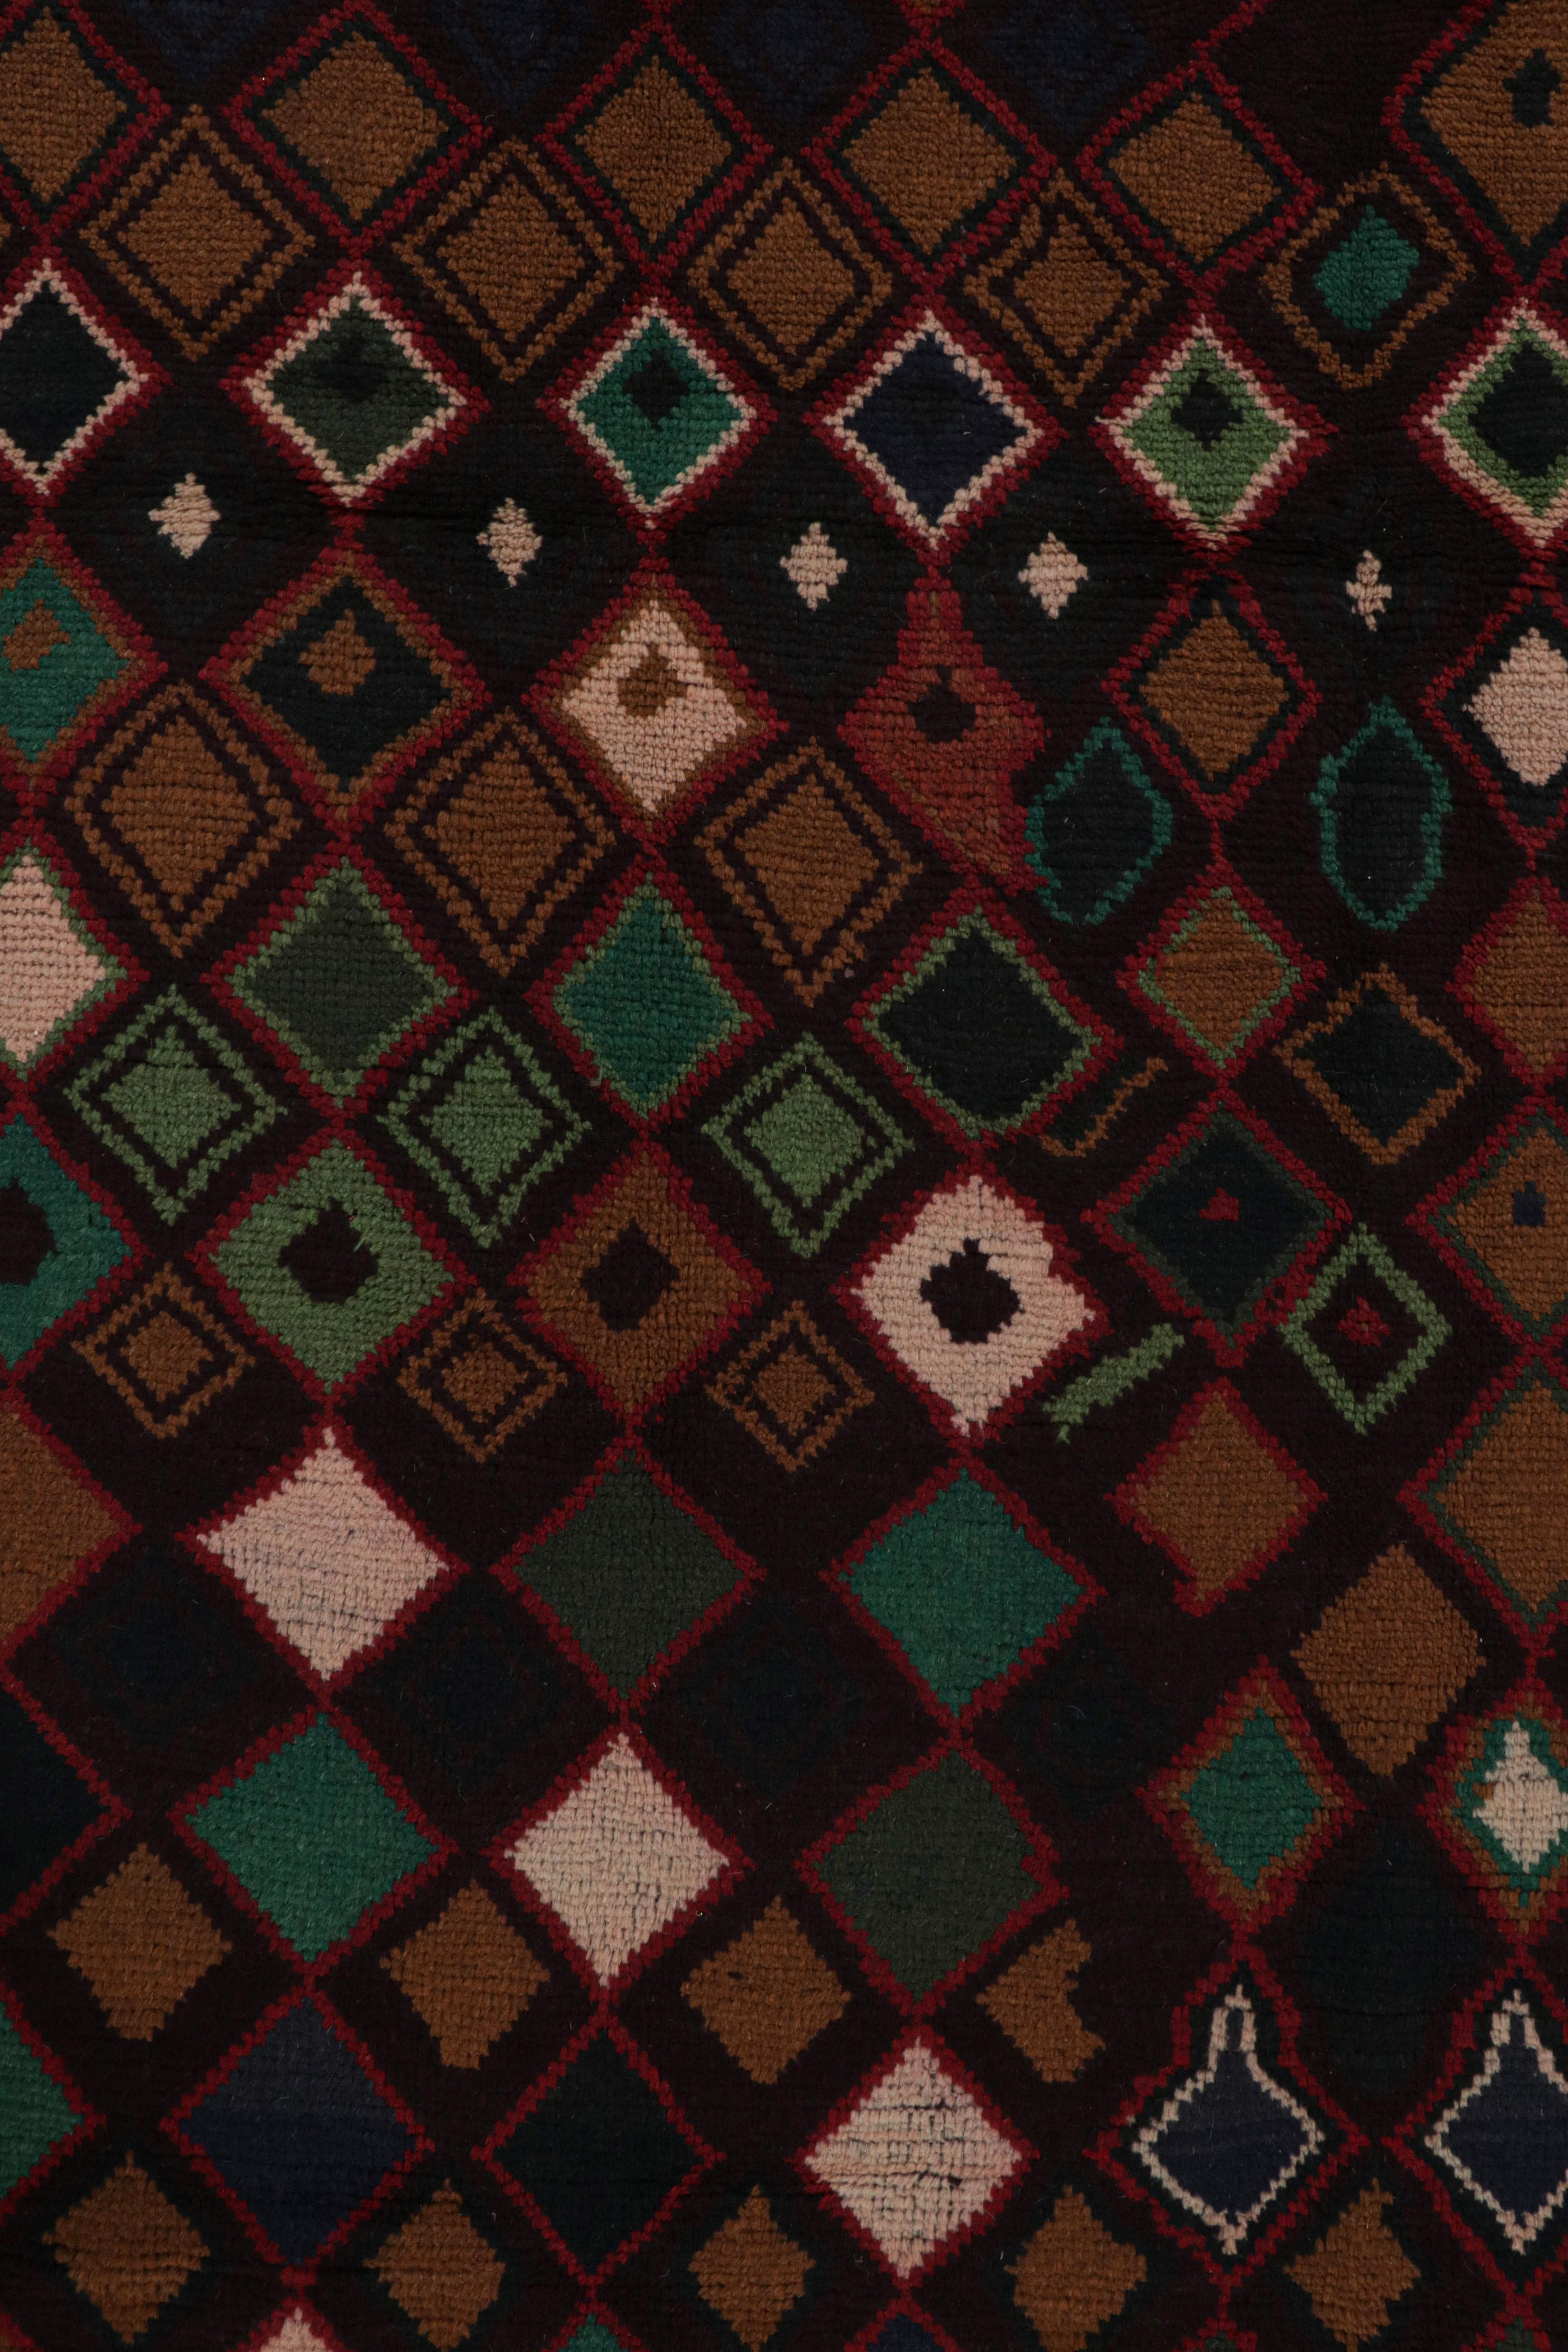 Contemporary Rug & Kilim’s Baluch Tribal Rug in Burgundy with Colorful Diamond Patterns For Sale